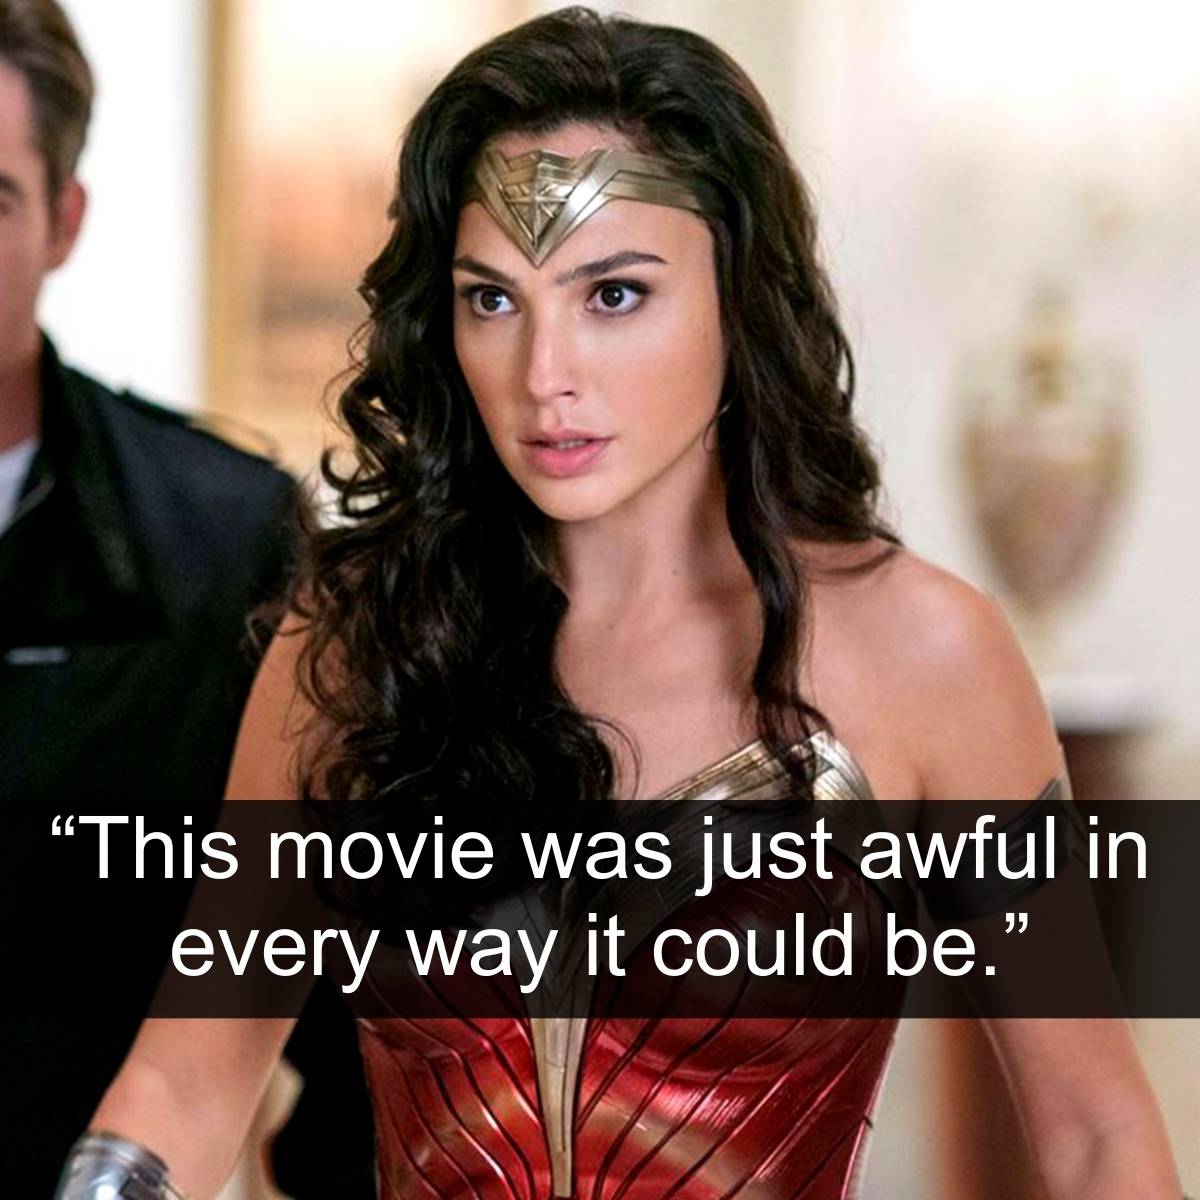 <p>Wonder Woman 1984 has not been spared by its audience, with many finding it lacking in several areas. Unlike the first Suicide Squad, which some viewers enjoyed as a "fun bad movie," Wonder Woman 1984 fails to capture even this dubious charm. Critics argue that it falls short in almost every aspect, leaving them disappointed and dissatisfied.</p> <p>The movie's inability to entertain, despite its high expectations and predecessor's success, has been a significant letdown for fans and casual viewers alike. The critique suggests that where Suicide Squad found a way to entertain despite its flaws, Wonder Woman 1984 missed opportunities to engage its audience, making it a tough watch without the redeeming qualities of being enjoyably bad.</p>